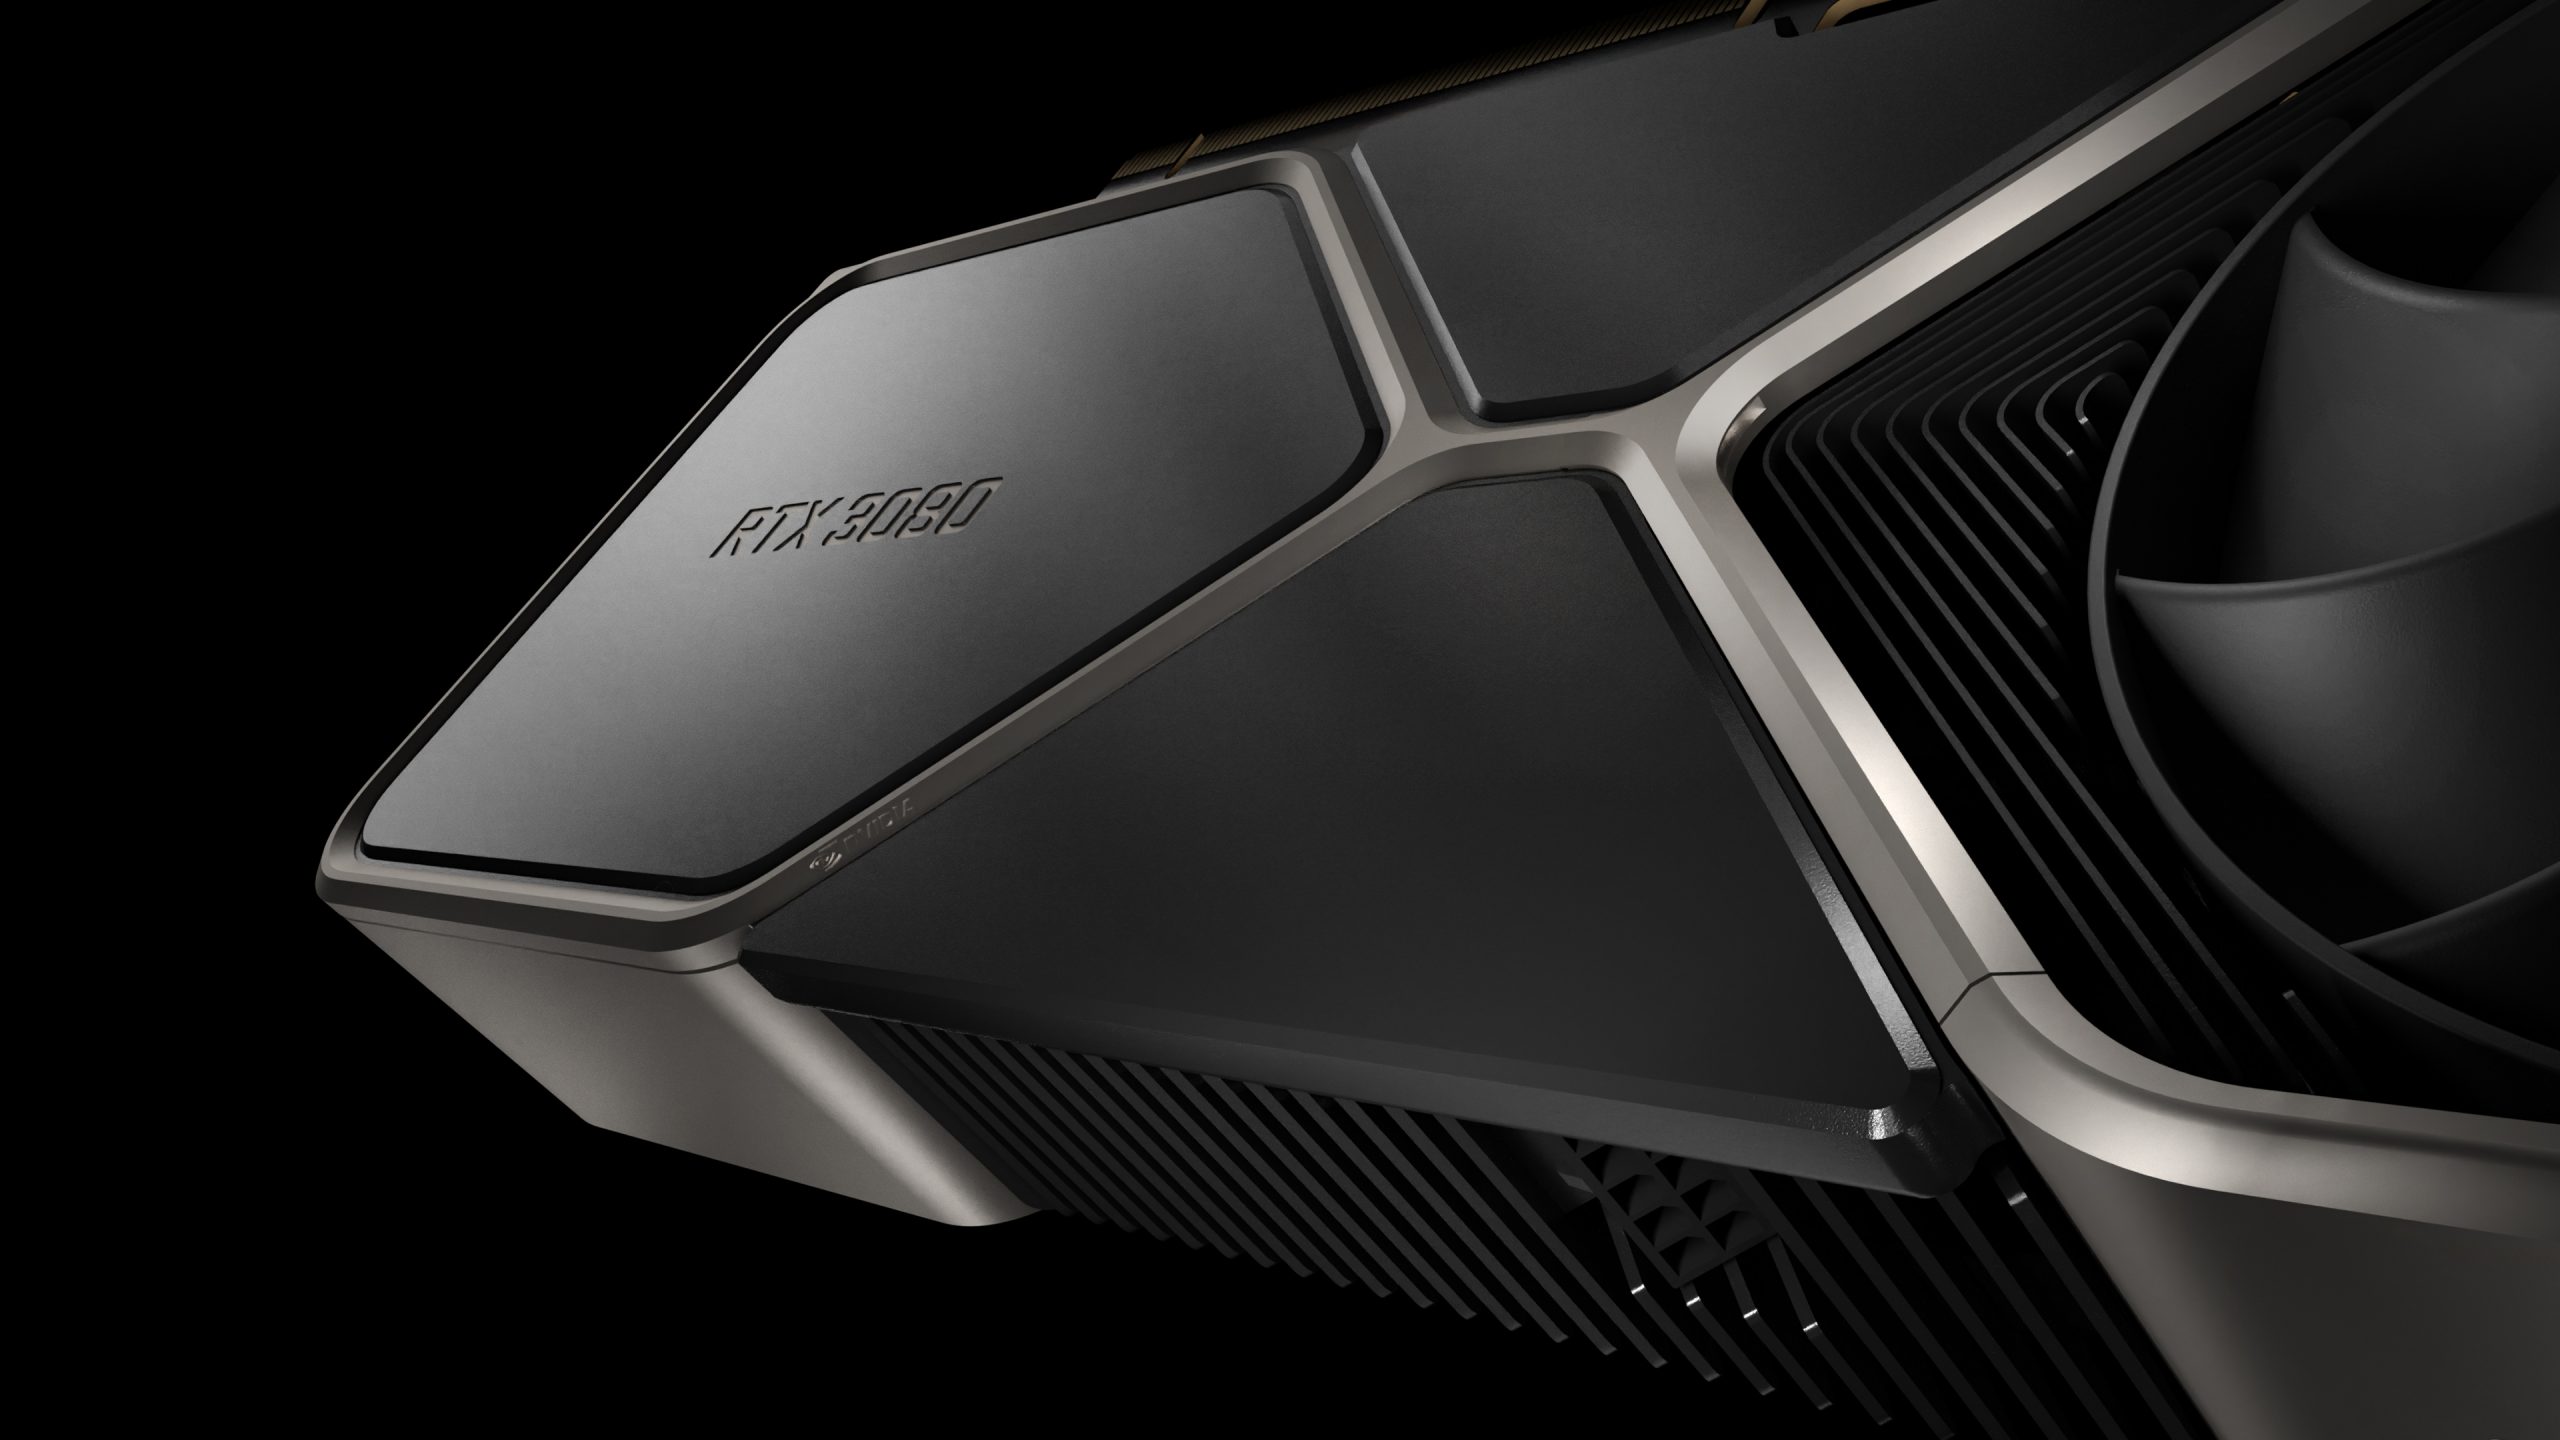 Nvidia Geforce RTX 3080 founders edition is going on sale at 6am